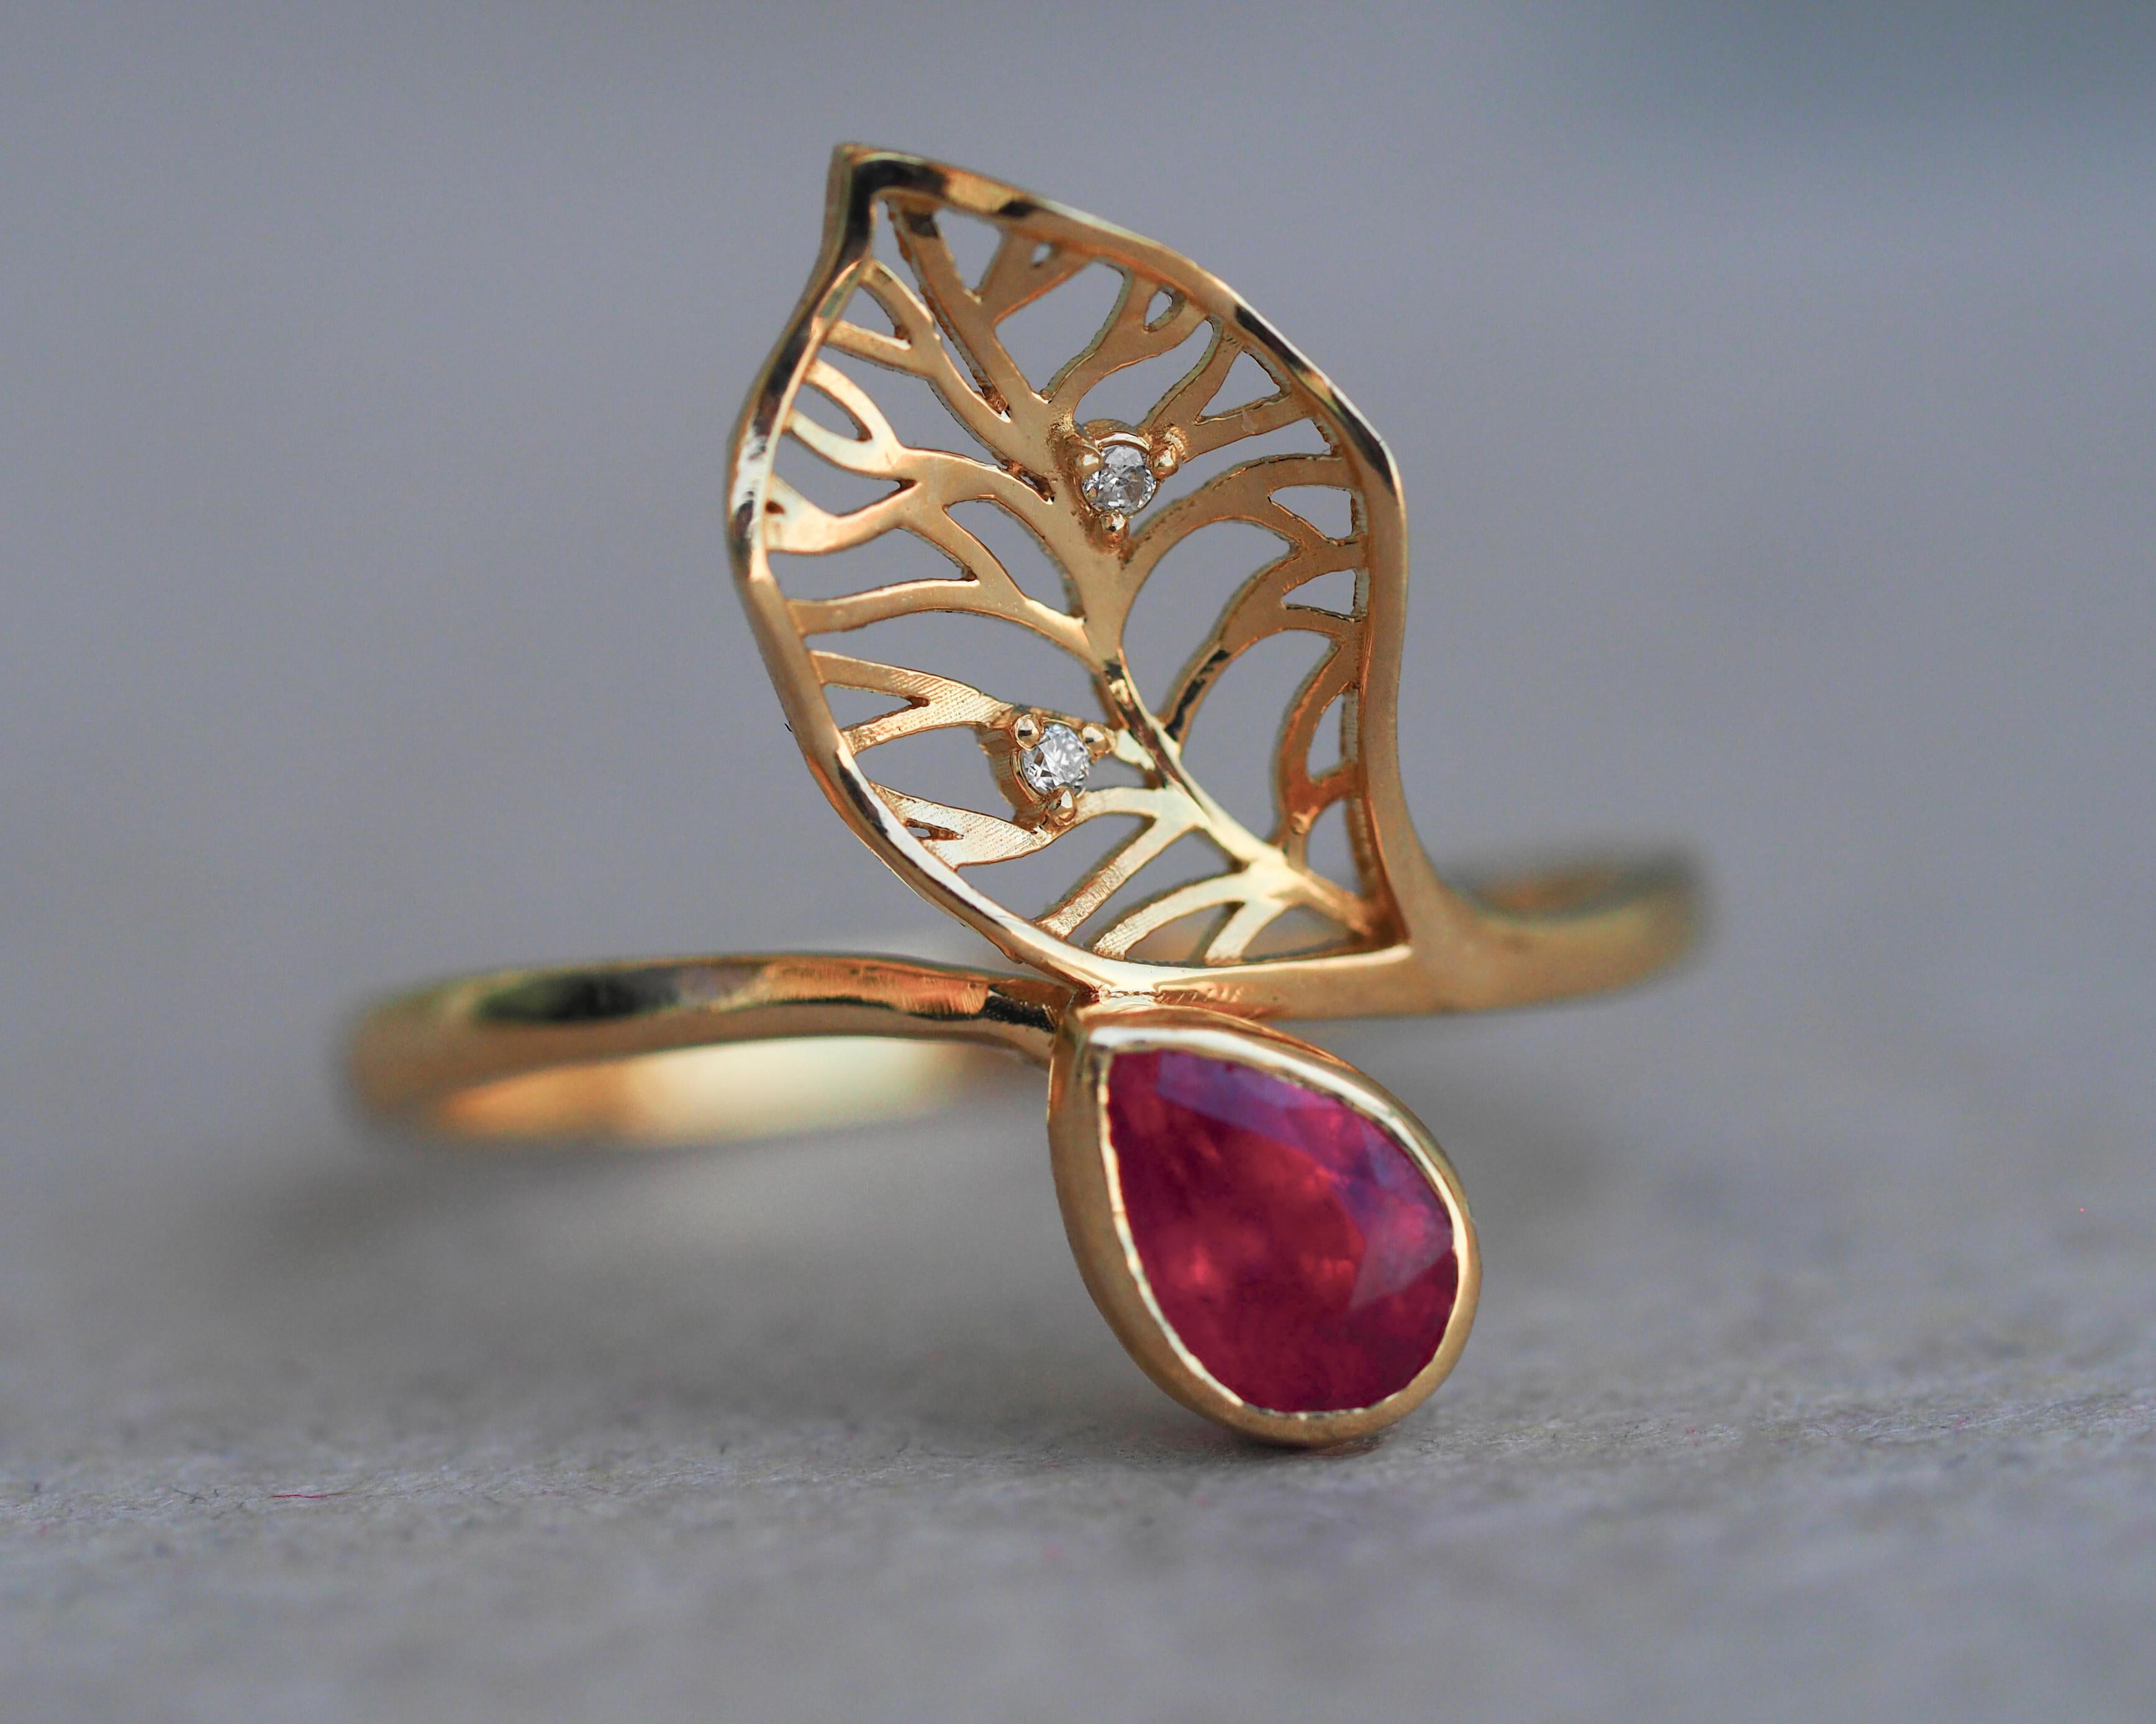 For Sale:  14 Kt Gold Ring with Ruby and Diamonds, Gold Flower Ring, Leaf Gold Ring 8